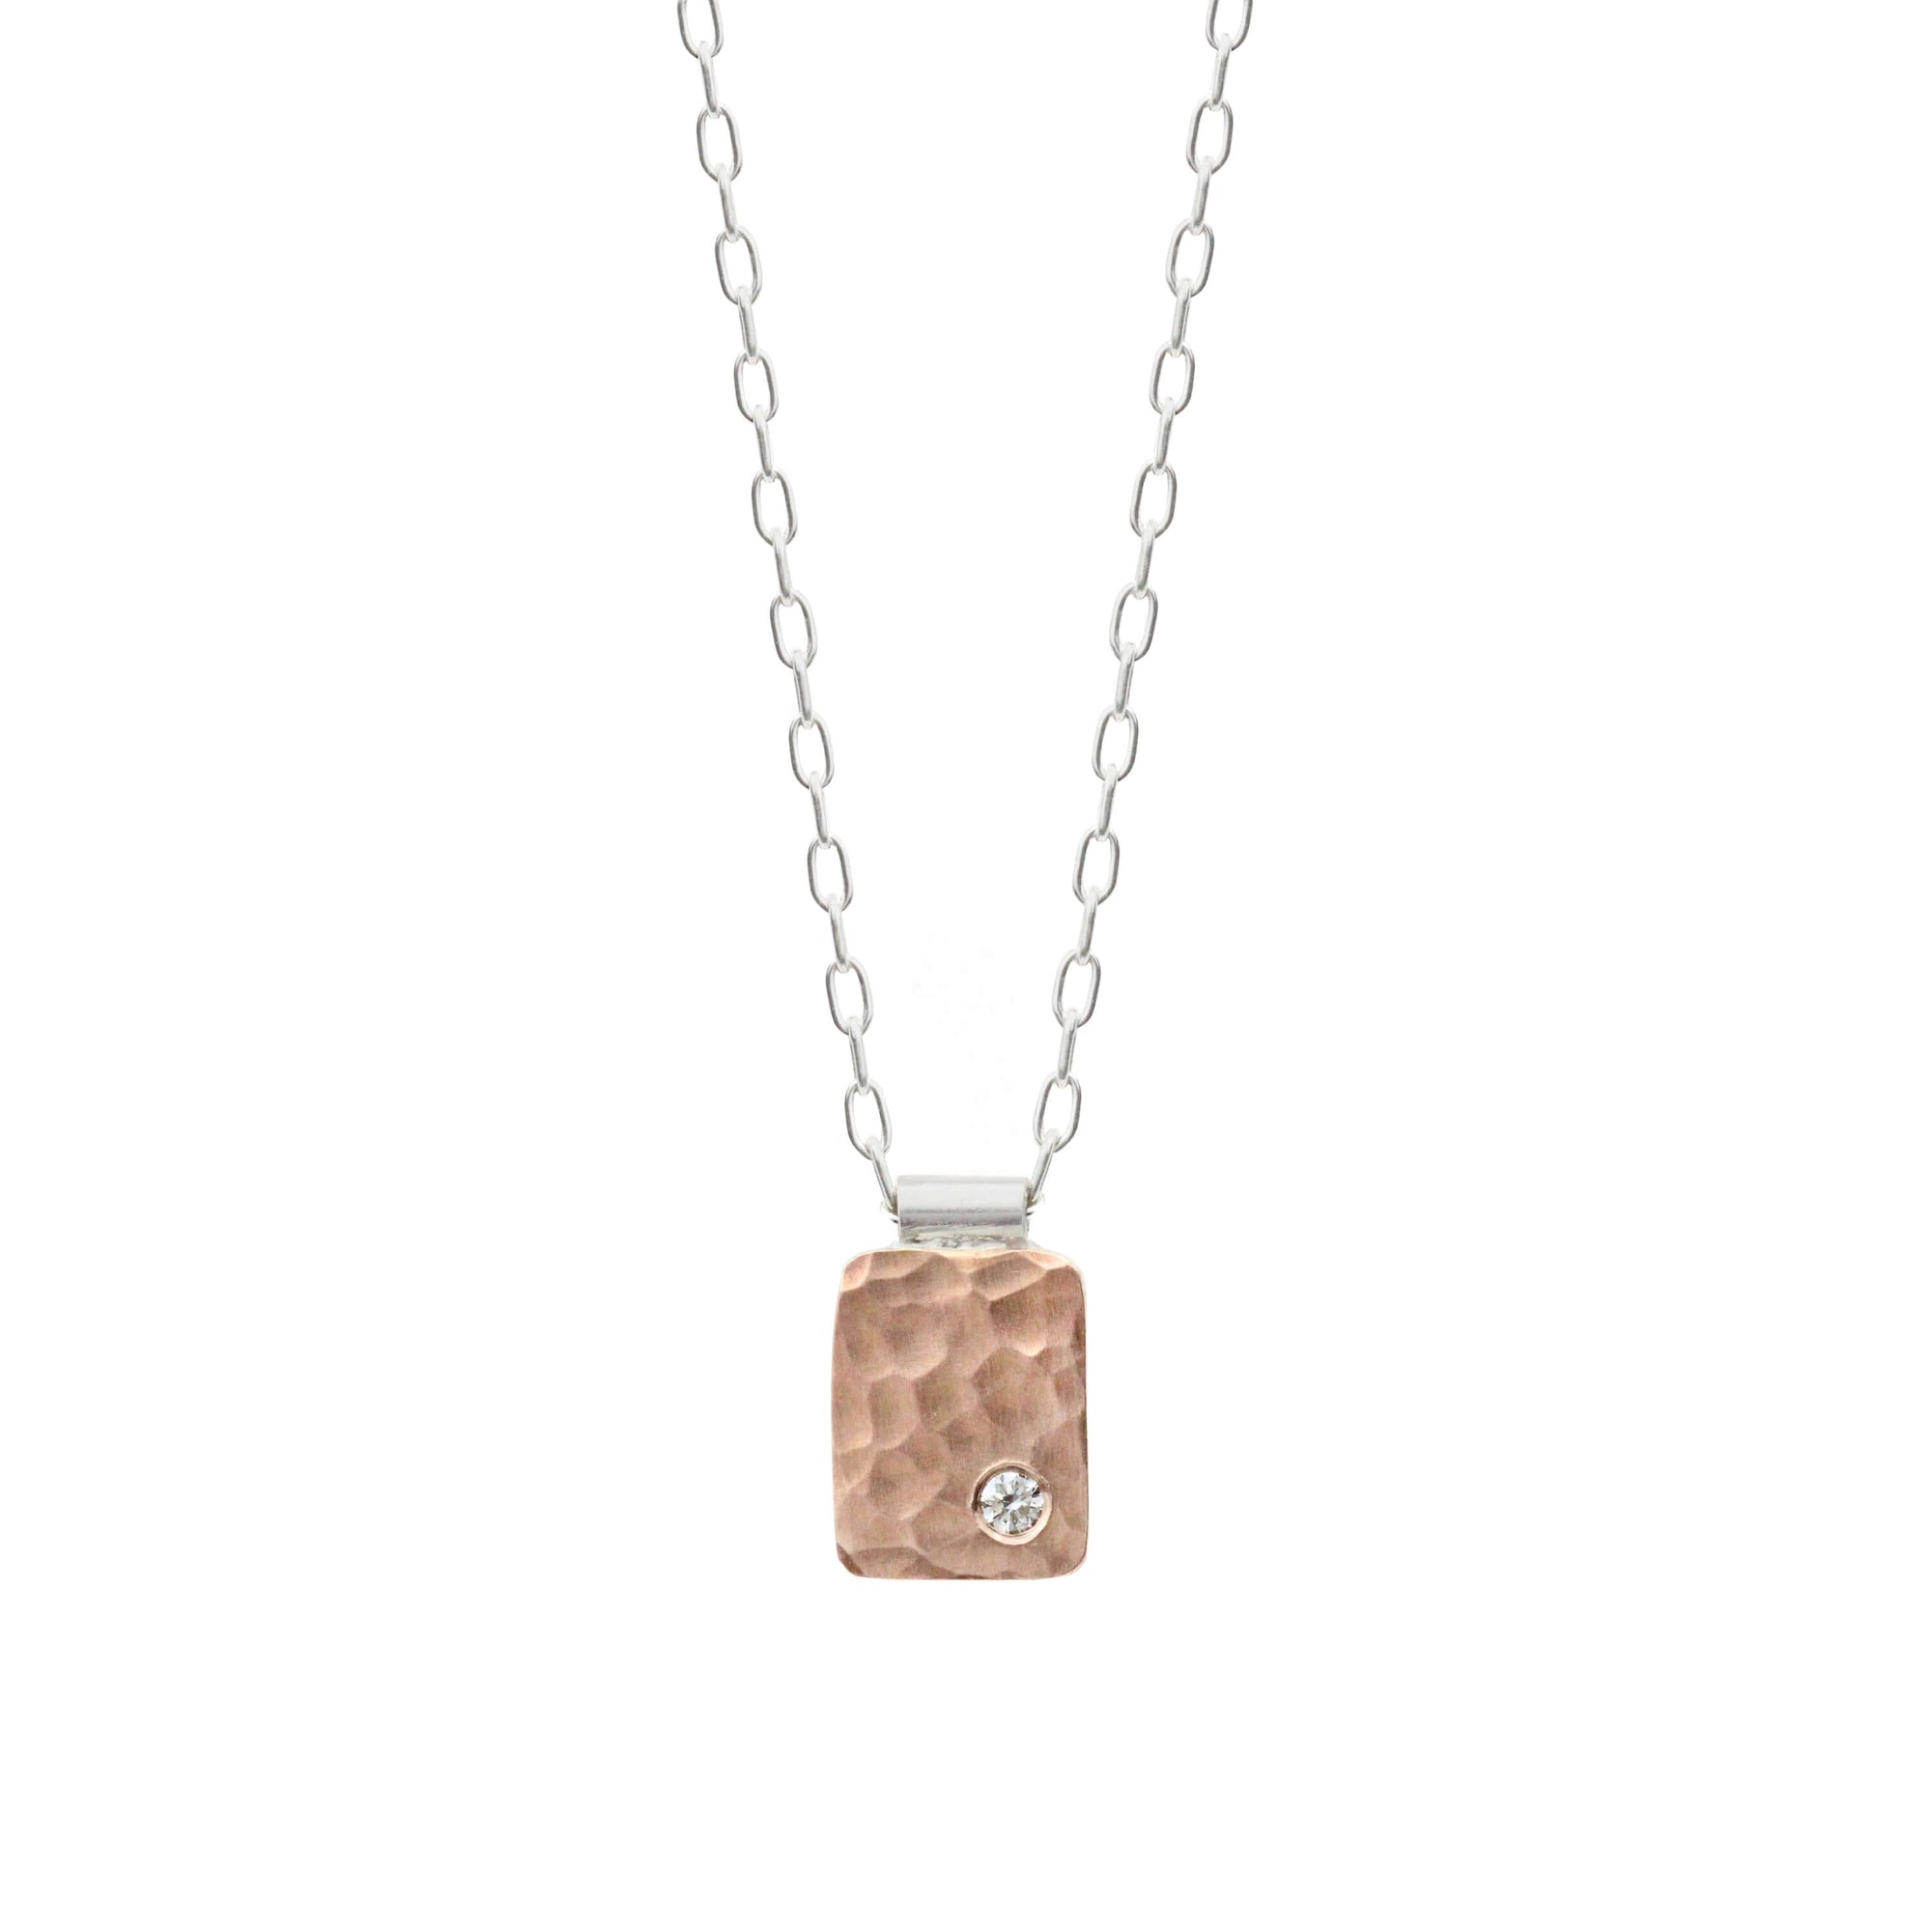 Hammered red gold and white diamond rectangle cell pendant. Handmade by EC Design Jewelry in Minneapolis, MN using recycled metal and conflict-free stone.